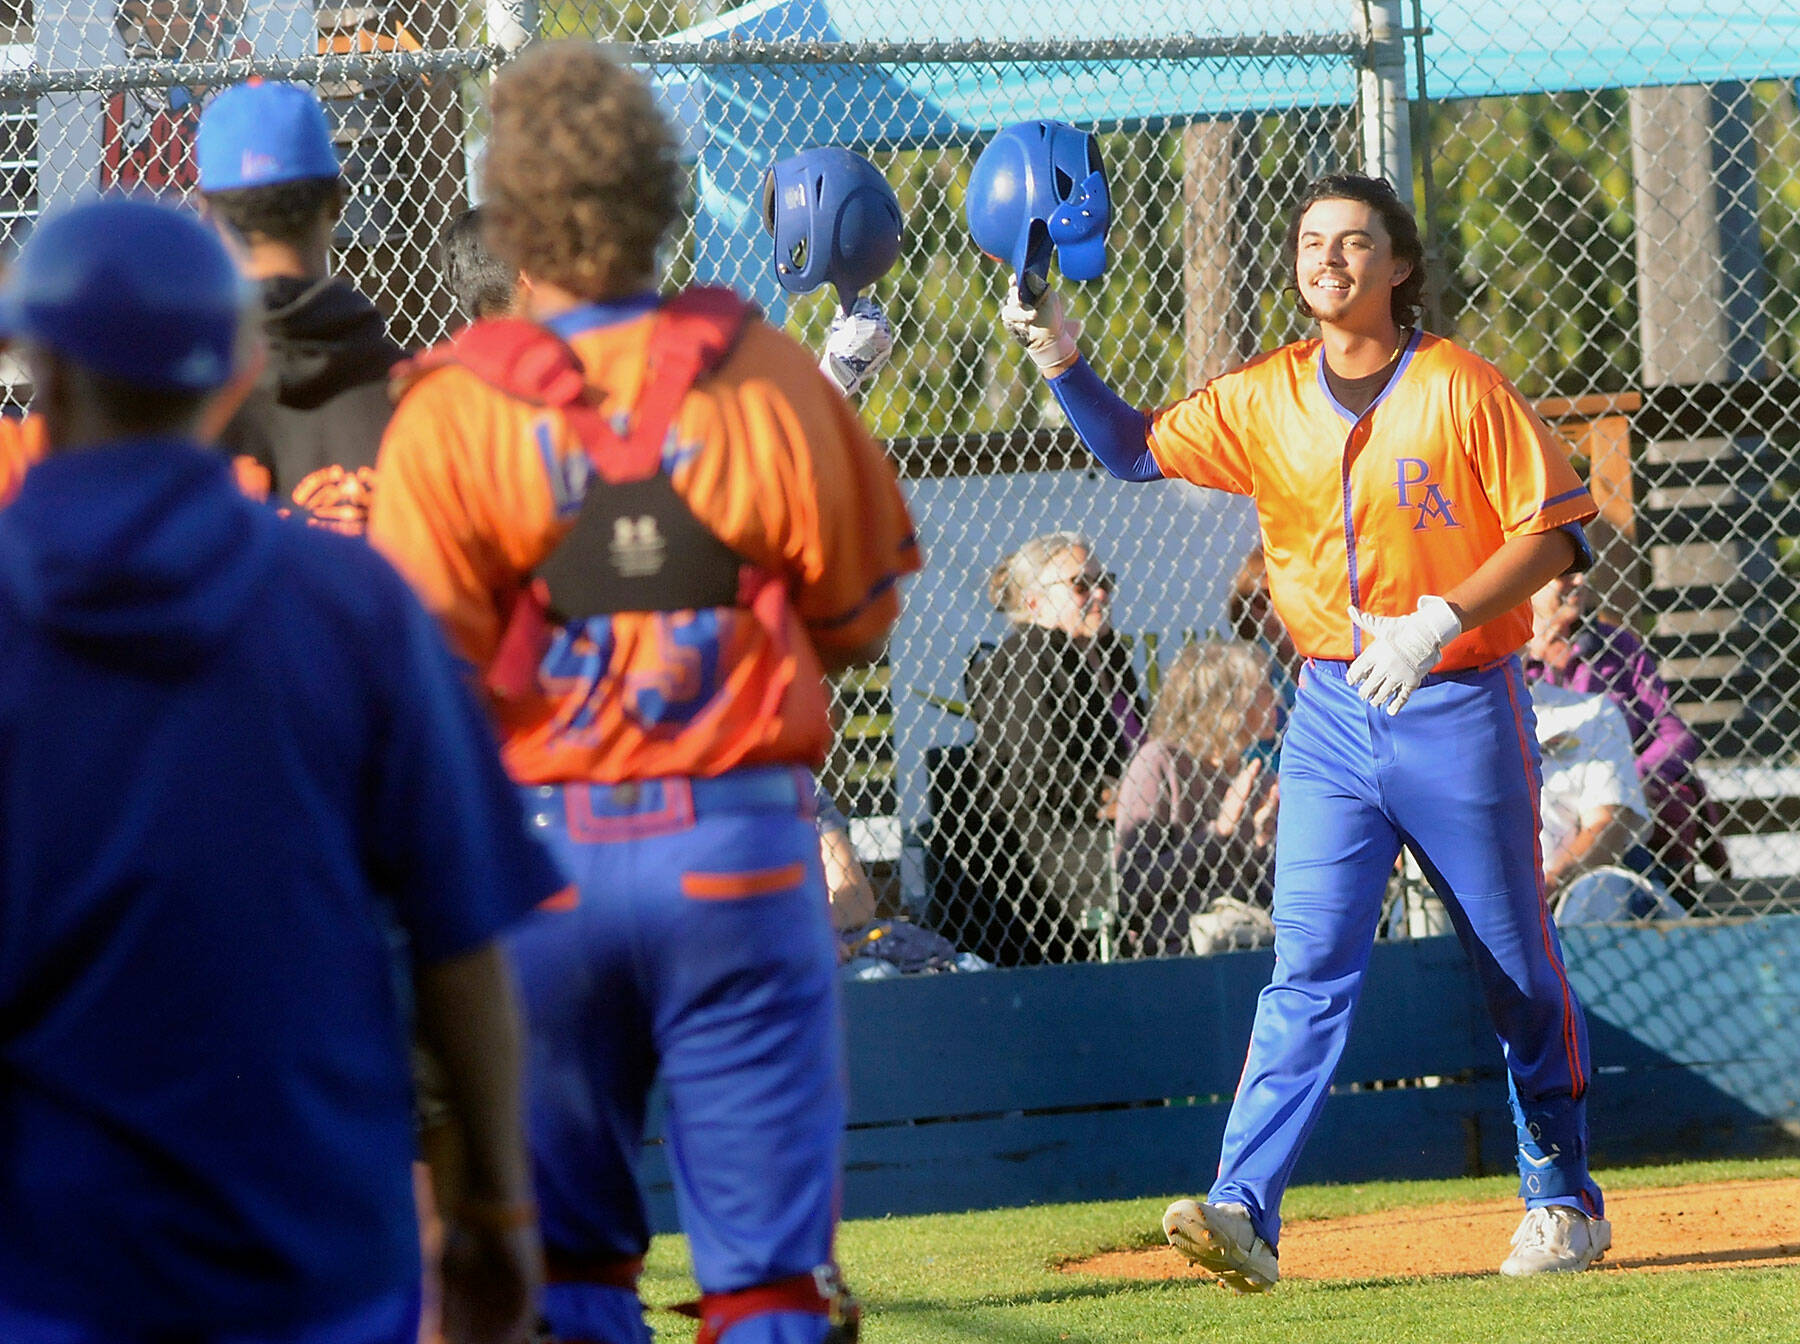 Lefties designated hitter Riley Parker tips his helmet at his teammates after rounding the bases with a solo homer in the first inning on Thursday night at Port Angeles Civic Field. (Keith Thorpe/Peninsula Daily News)